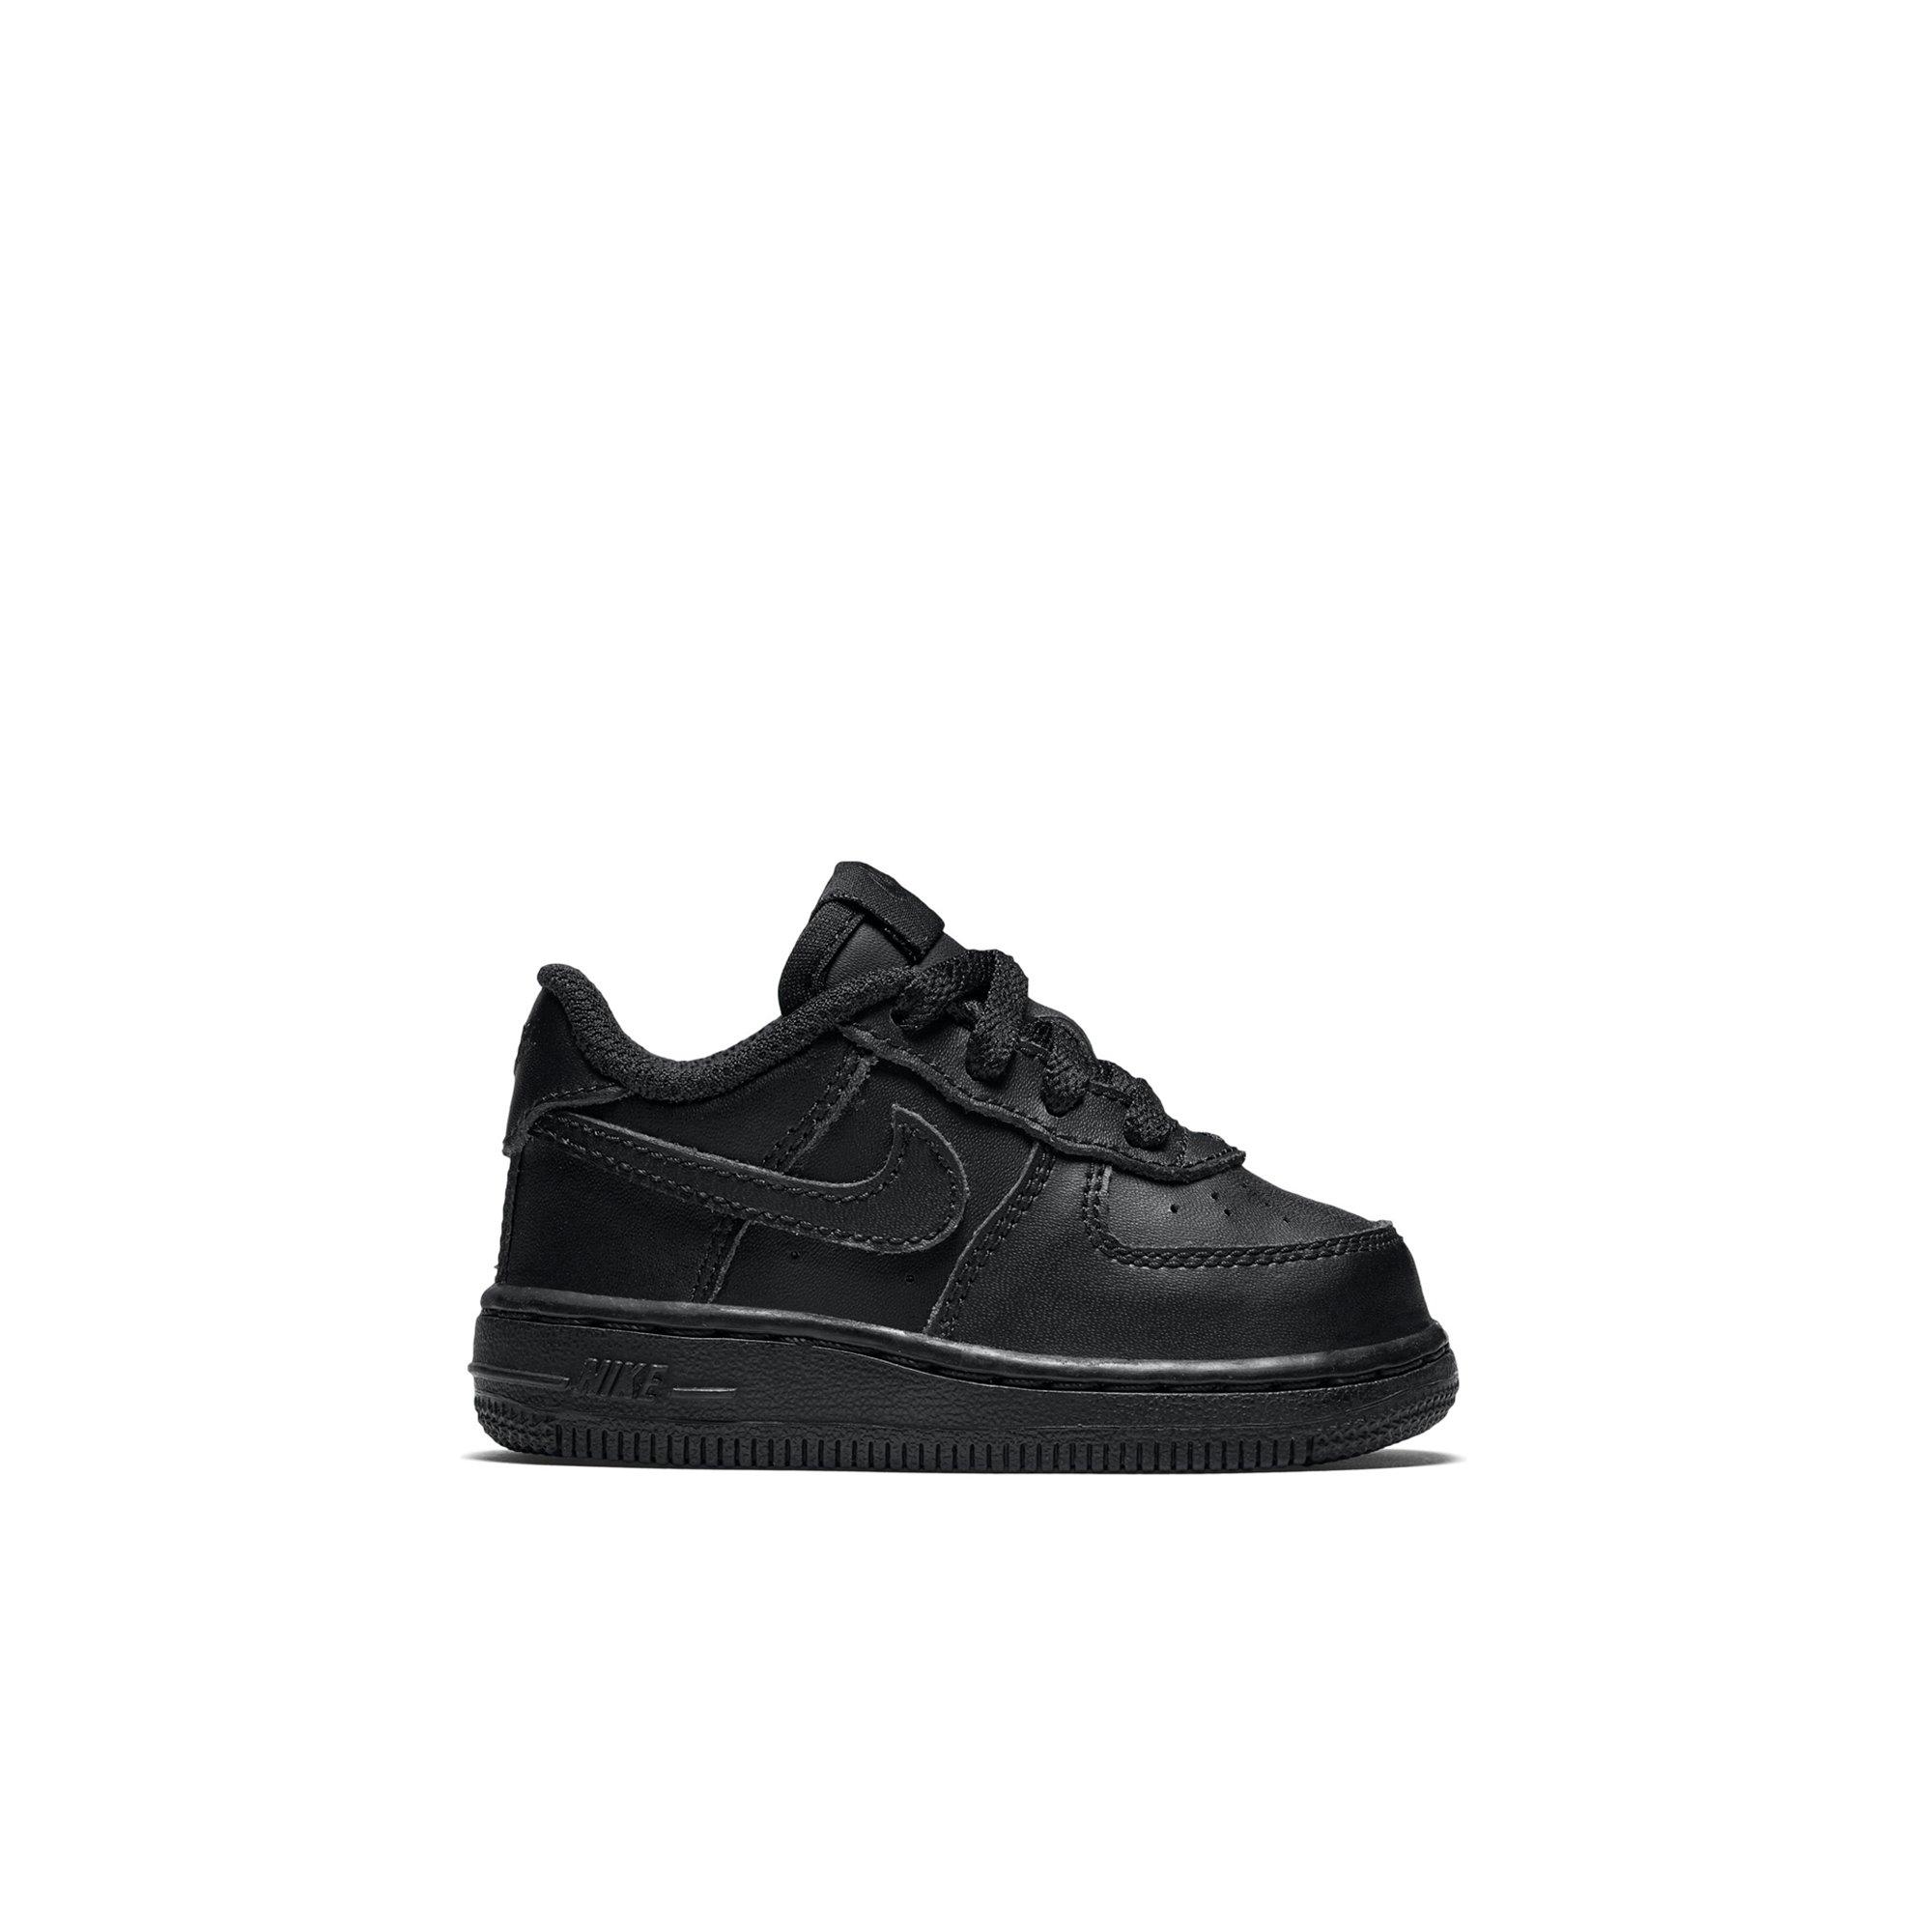 air force ones for toddlers